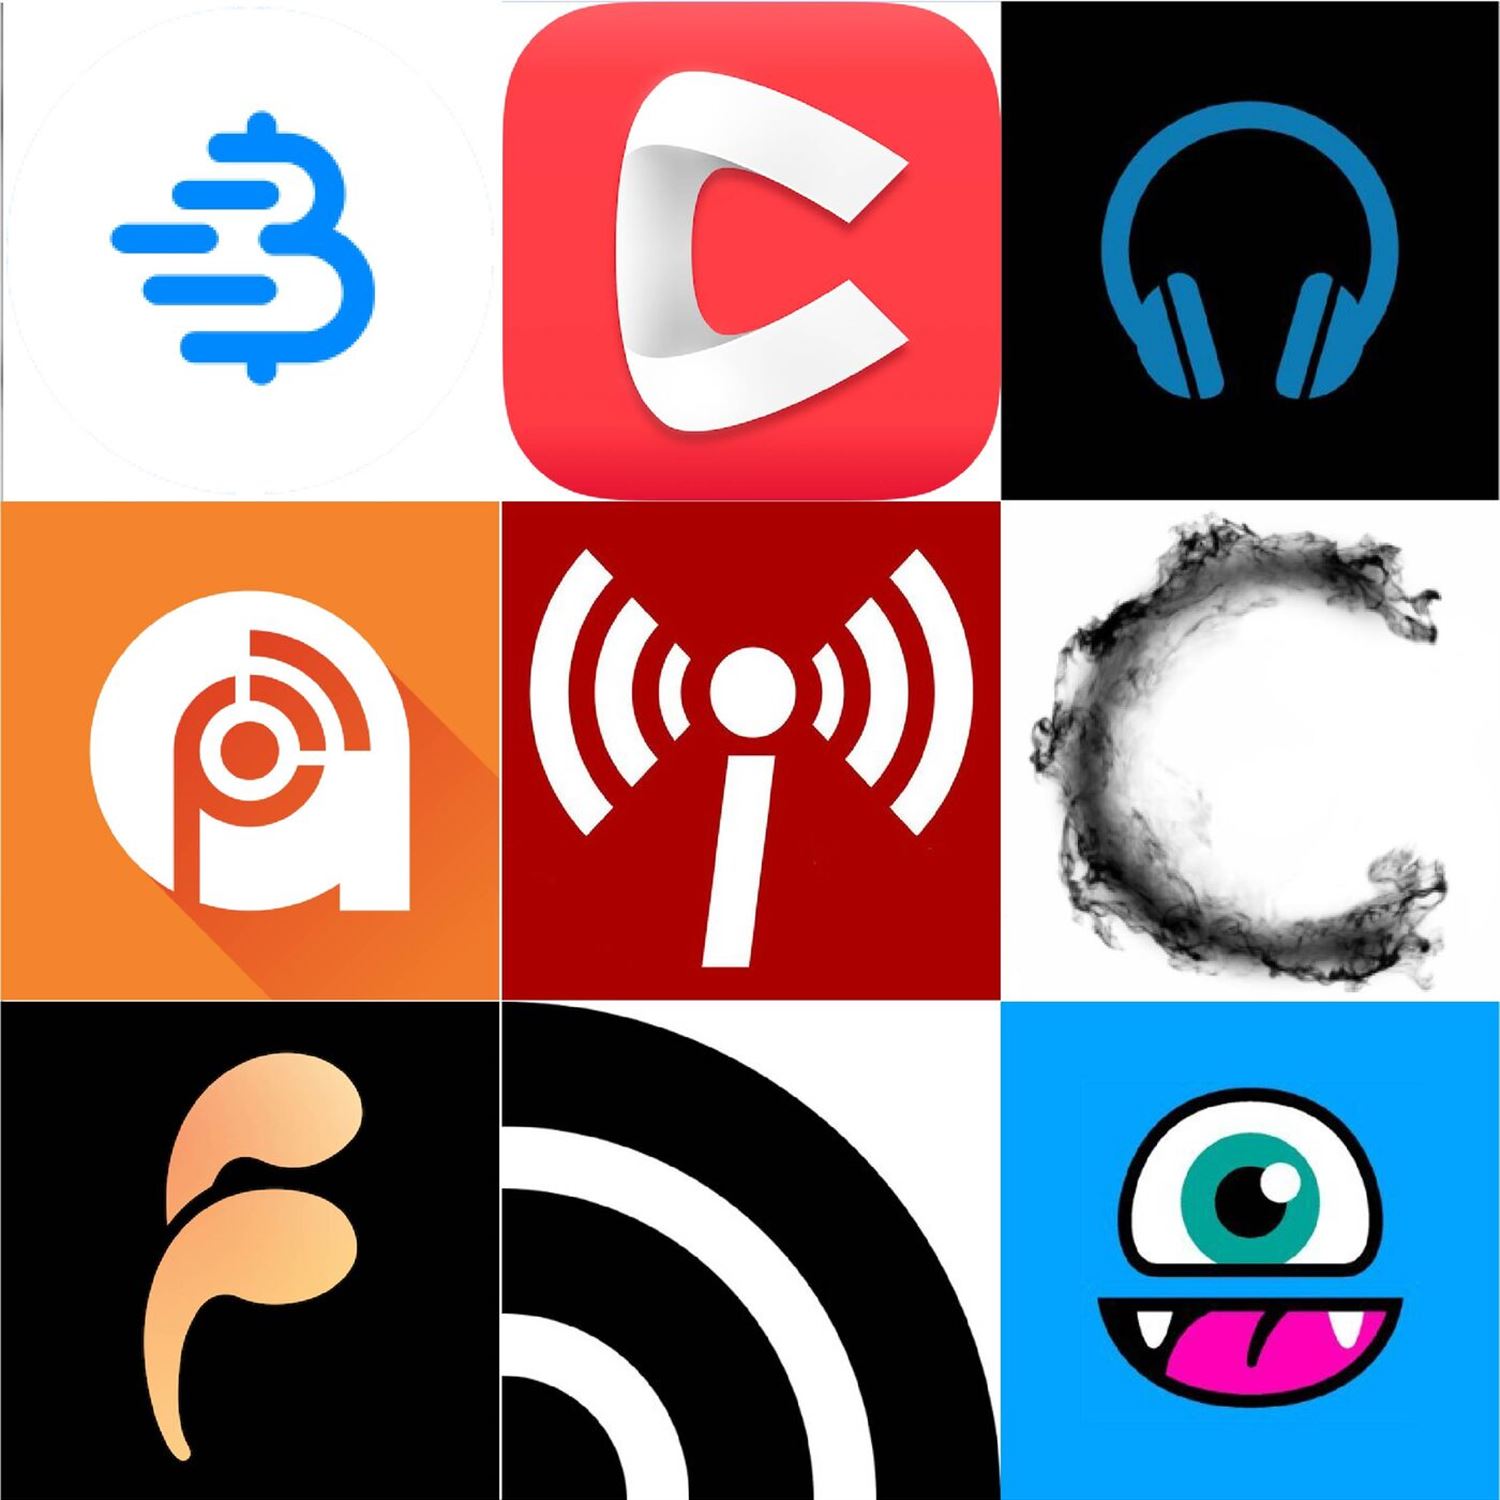 Podcasting 2.0 apps are mostly being built part-time